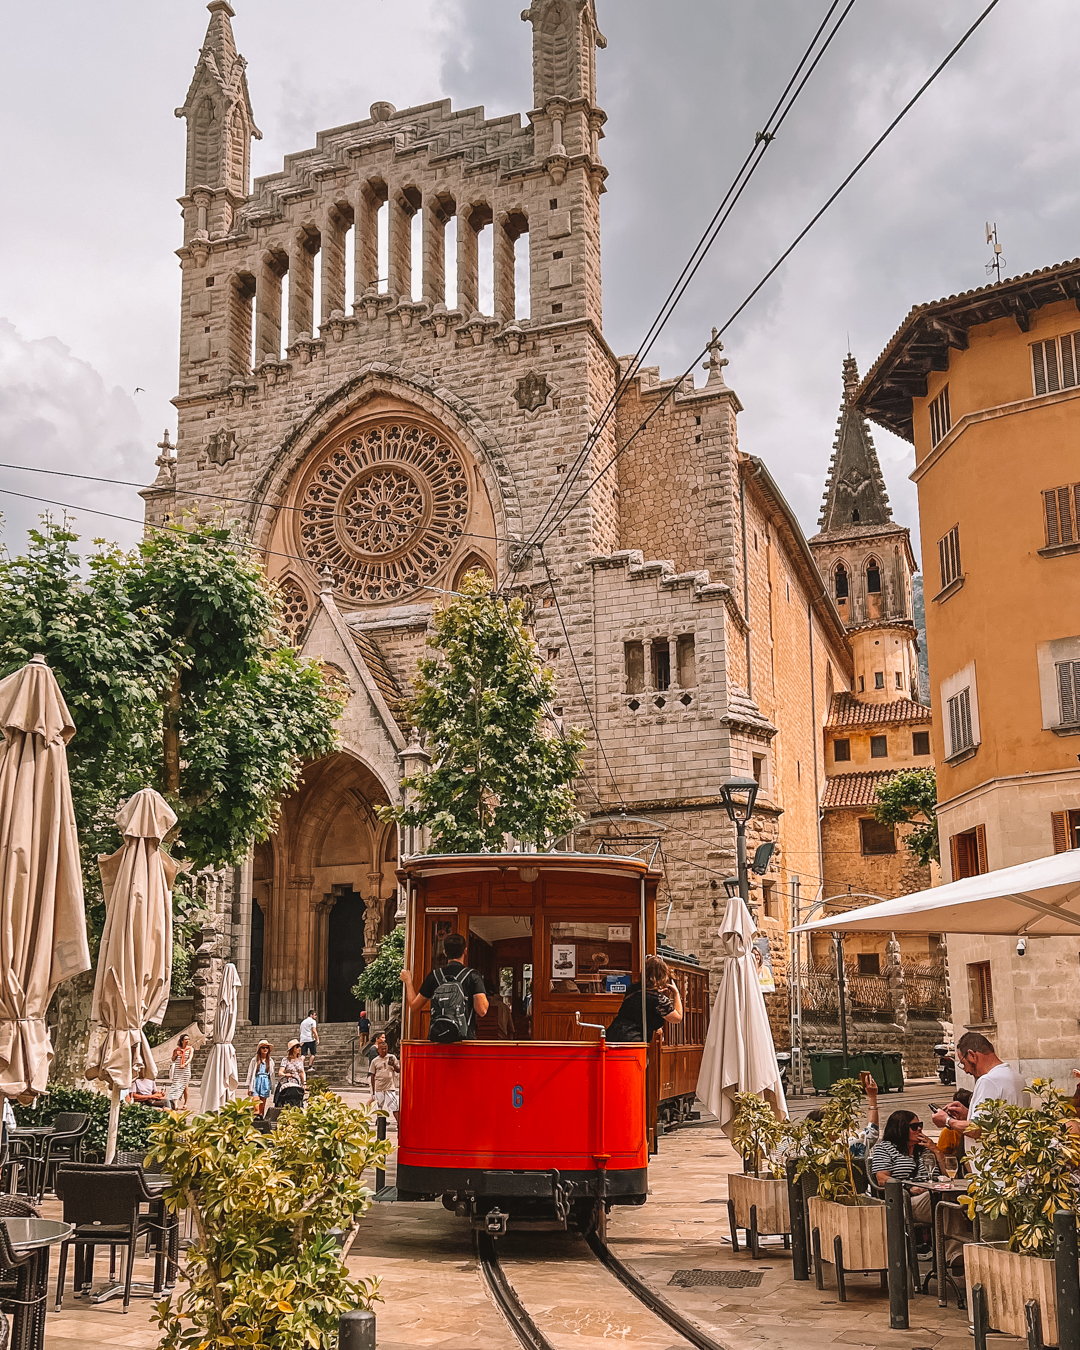 Ride the vintage train to Soller from Plama, Mallorca